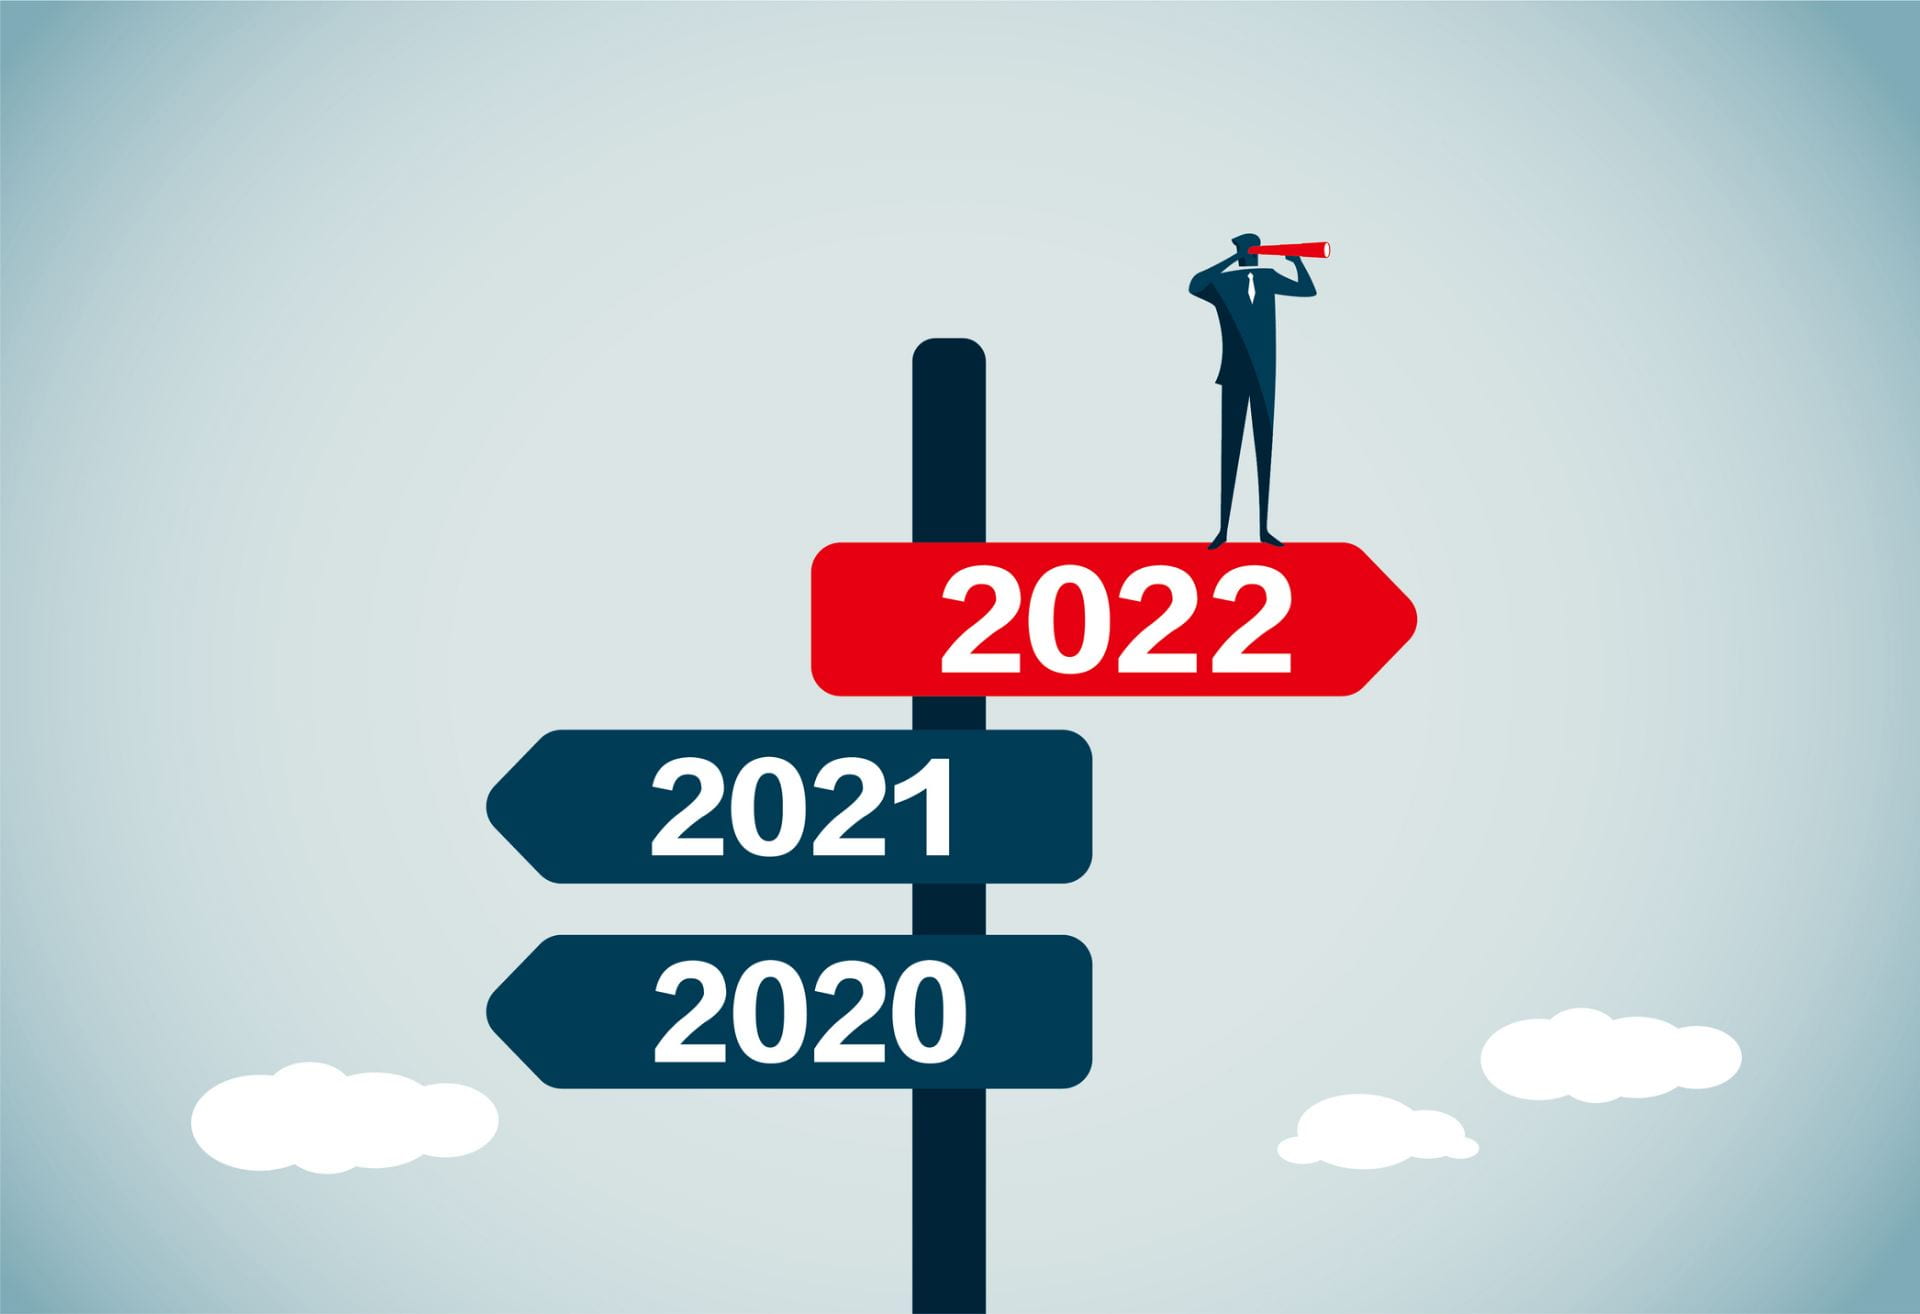 Guideposts showing years pointing in opposite directions with a person standing the on 2022 guidepost